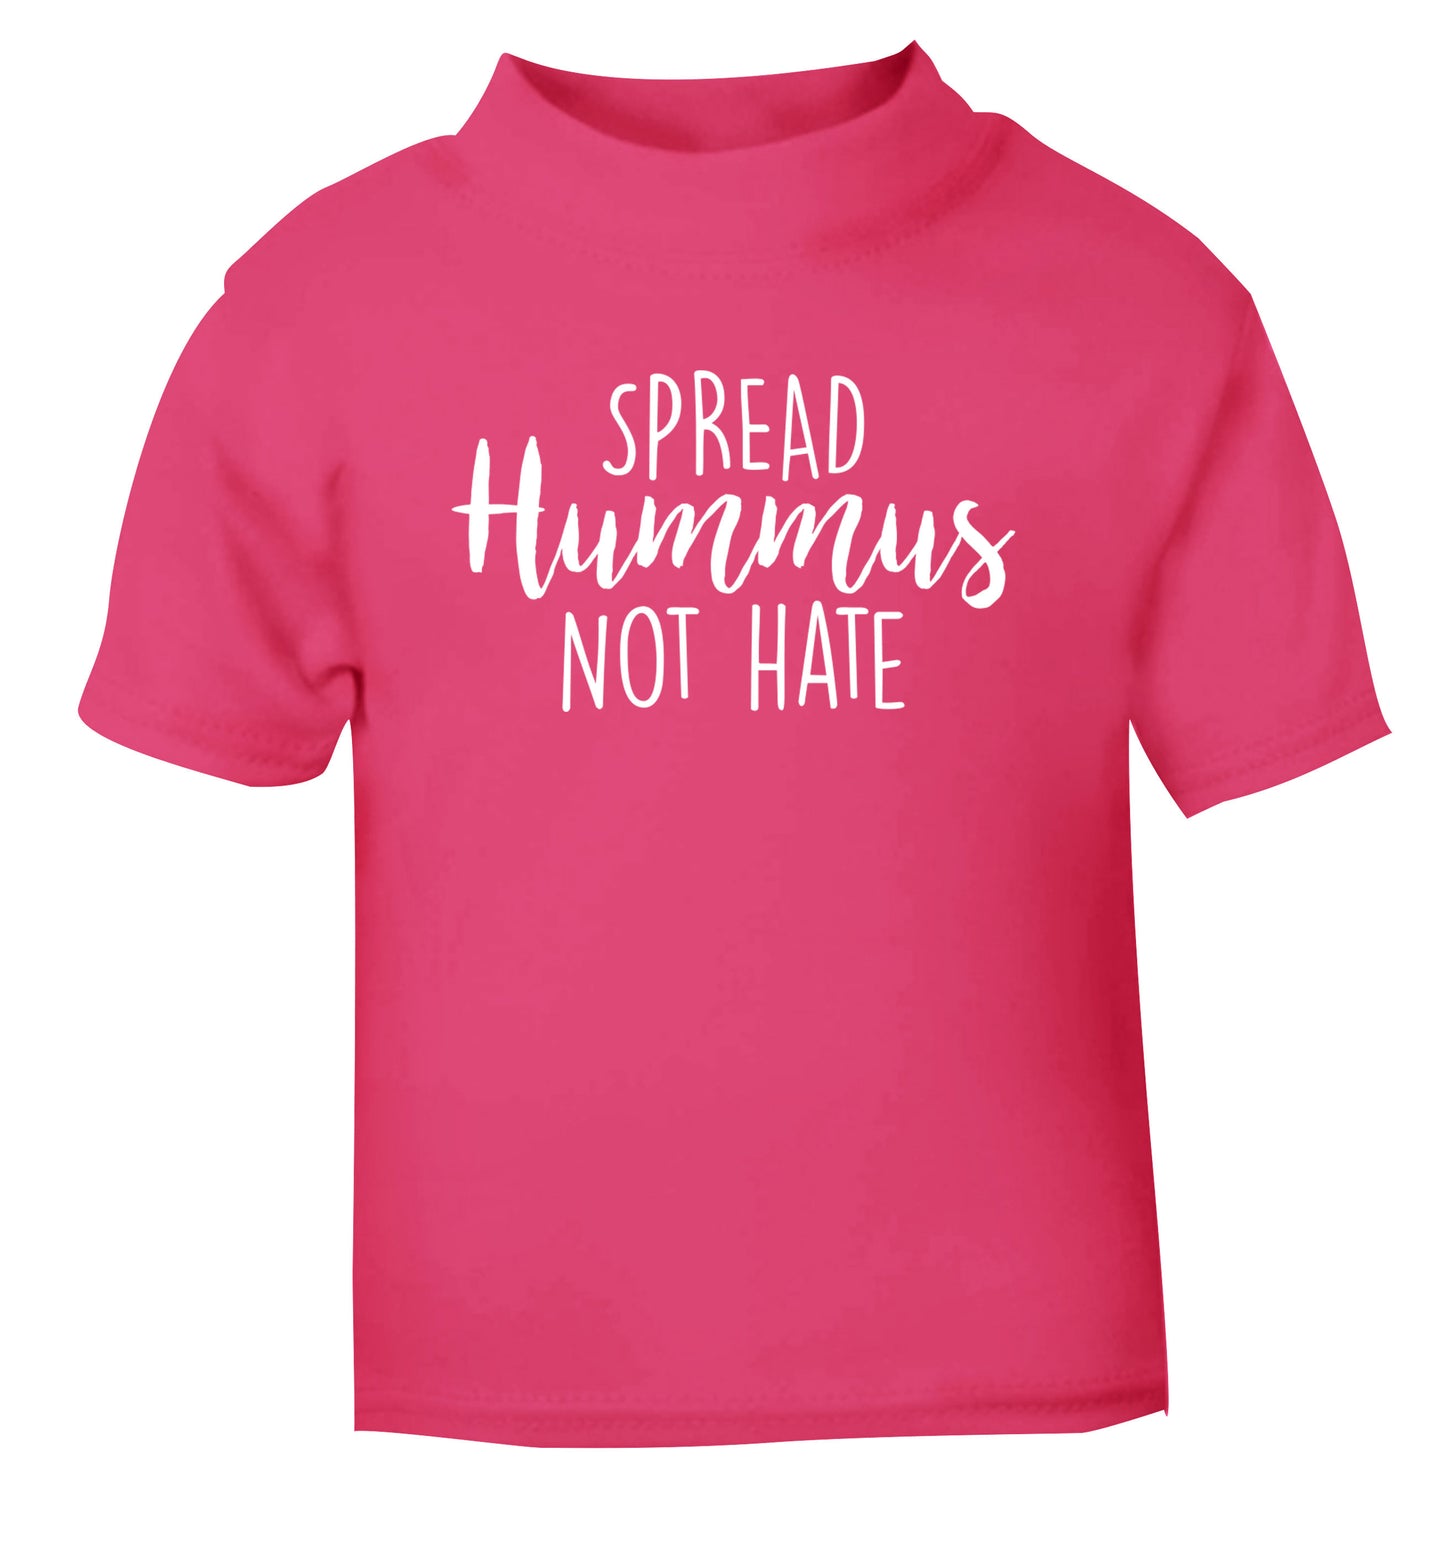 Spread hummus not hate script text pink Baby Toddler Tshirt 2 Years